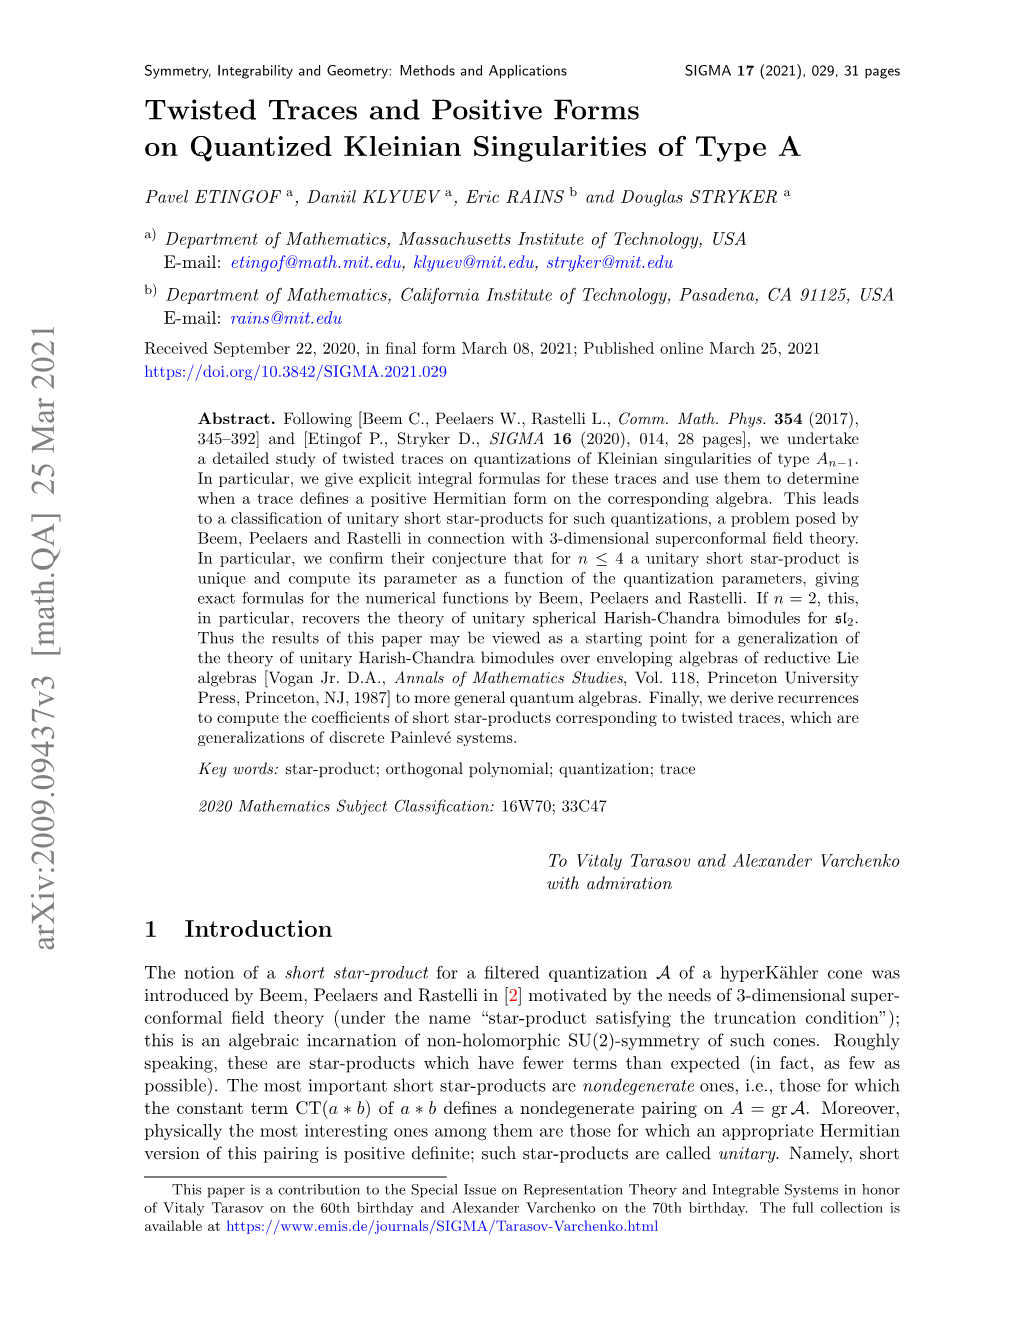 Twisted Traces and Positive Forms on Quantized Kleinian Singularities of Type A